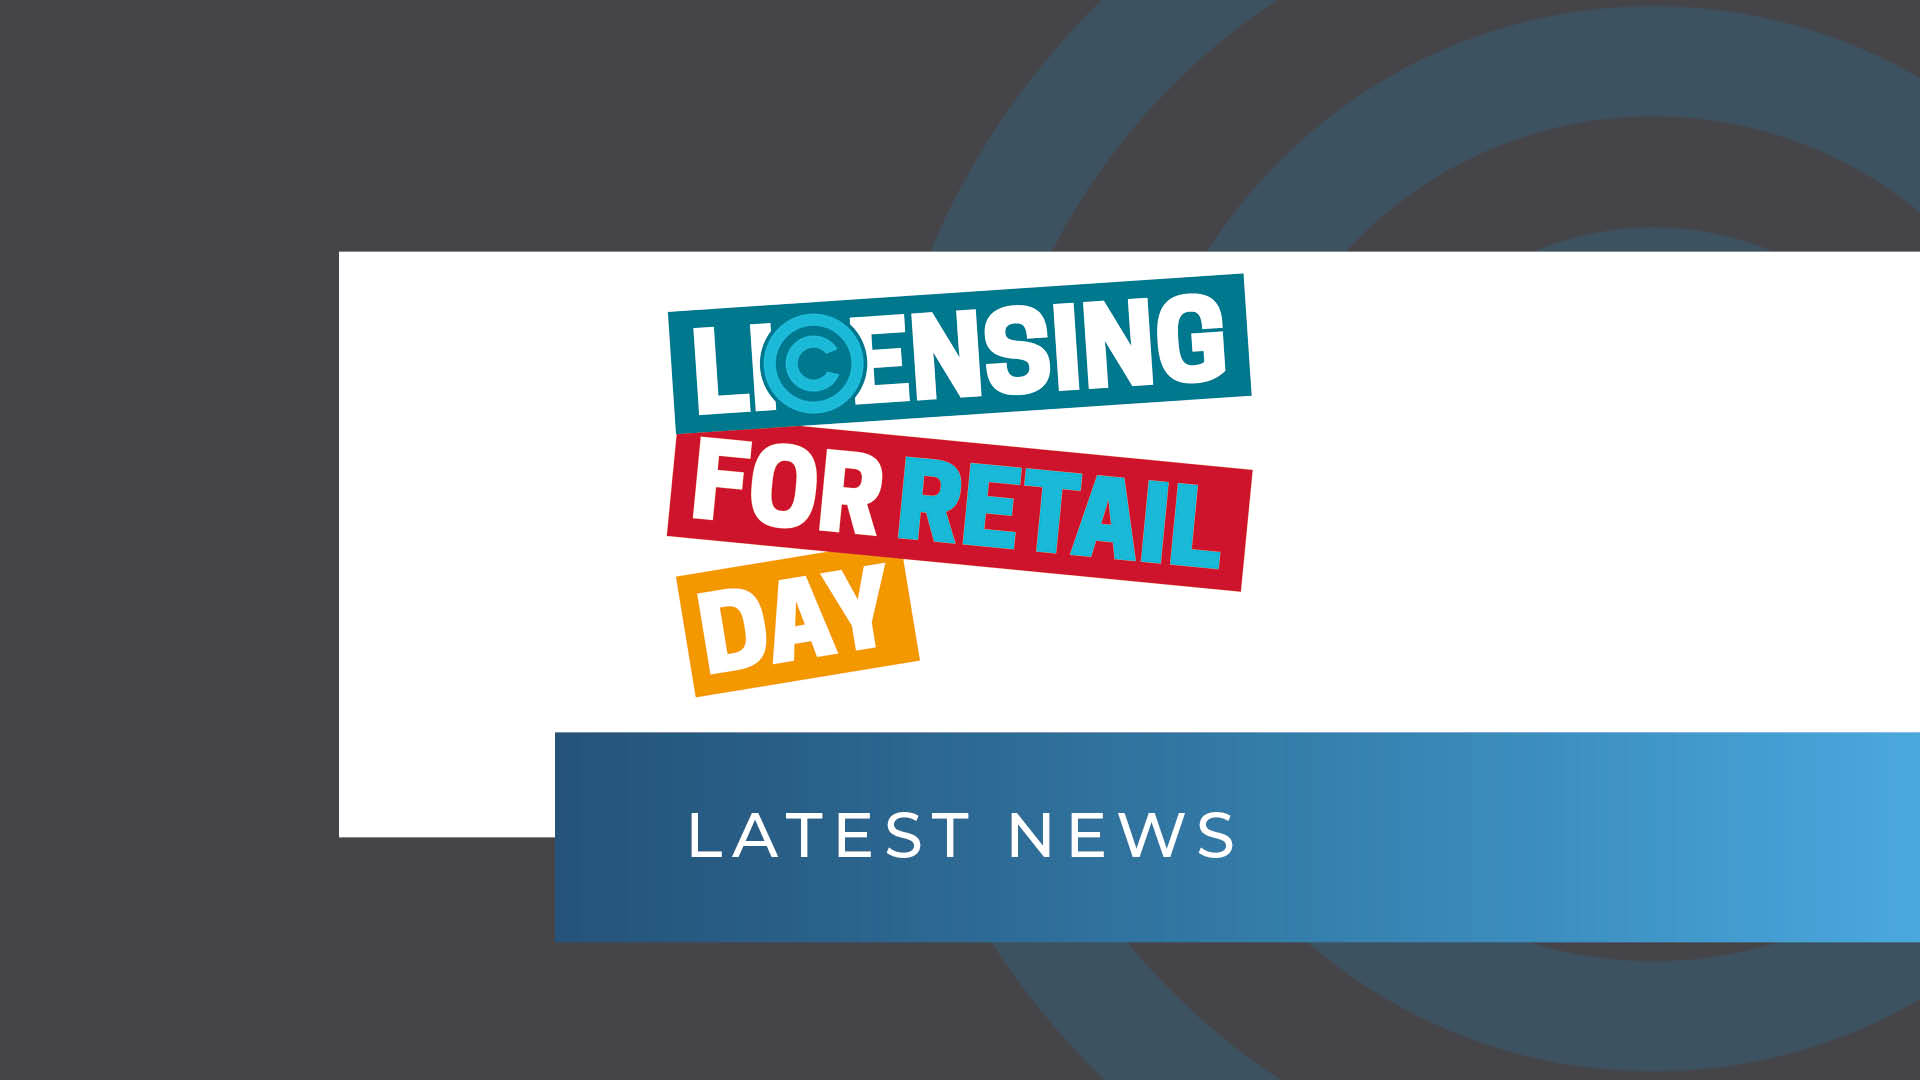 Licensing for Retail Conference launched by Global Licensing Group